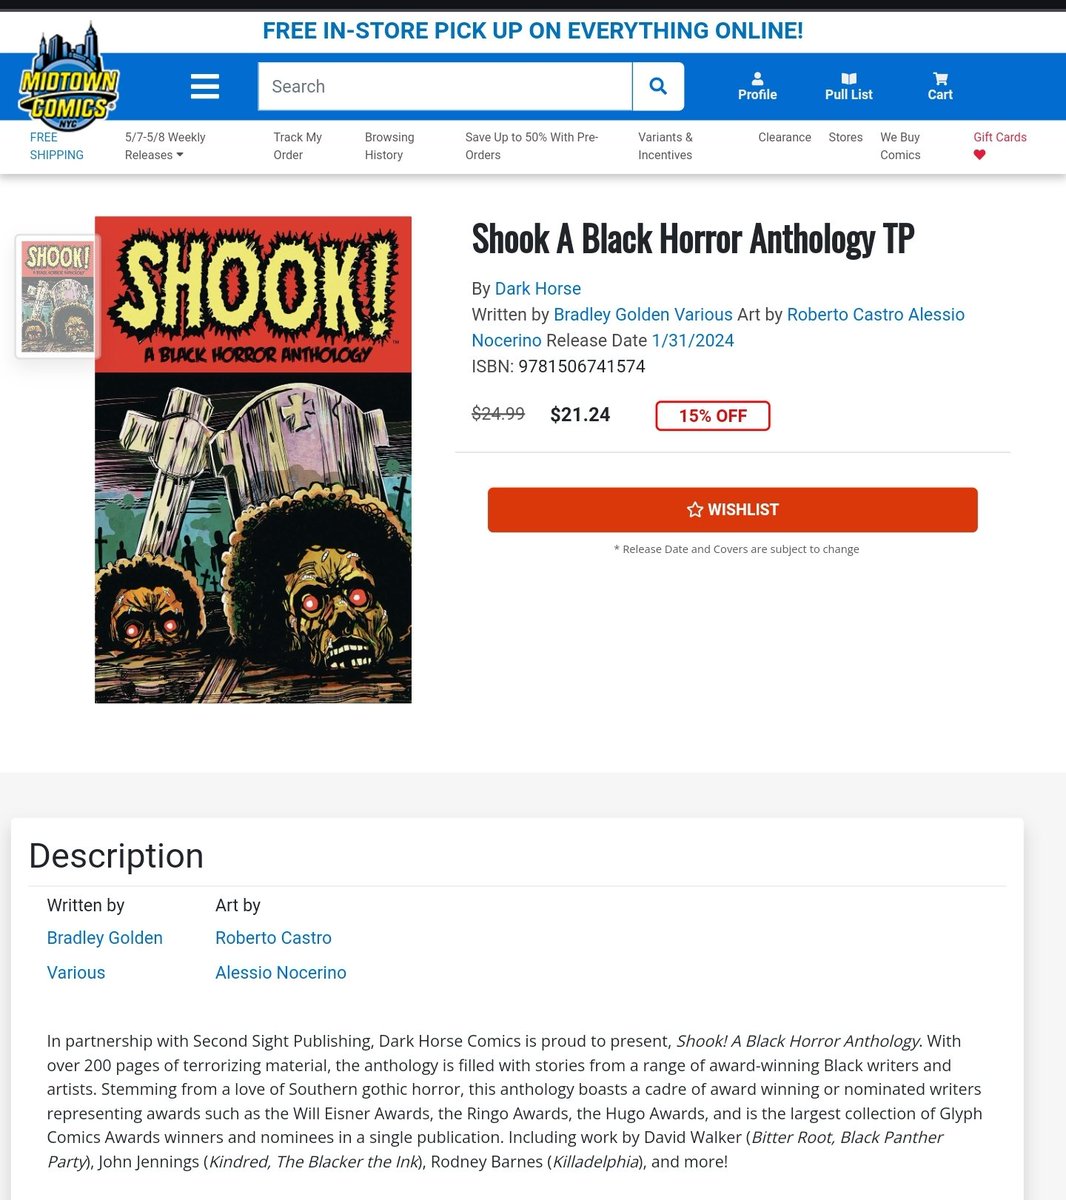 Just found out Shook! A Black Horror Anthology has sold out for the second time at Midtown Comics. It's great to see this title still selling out 4 months after release. @DarkHorseComics @MidtownComics